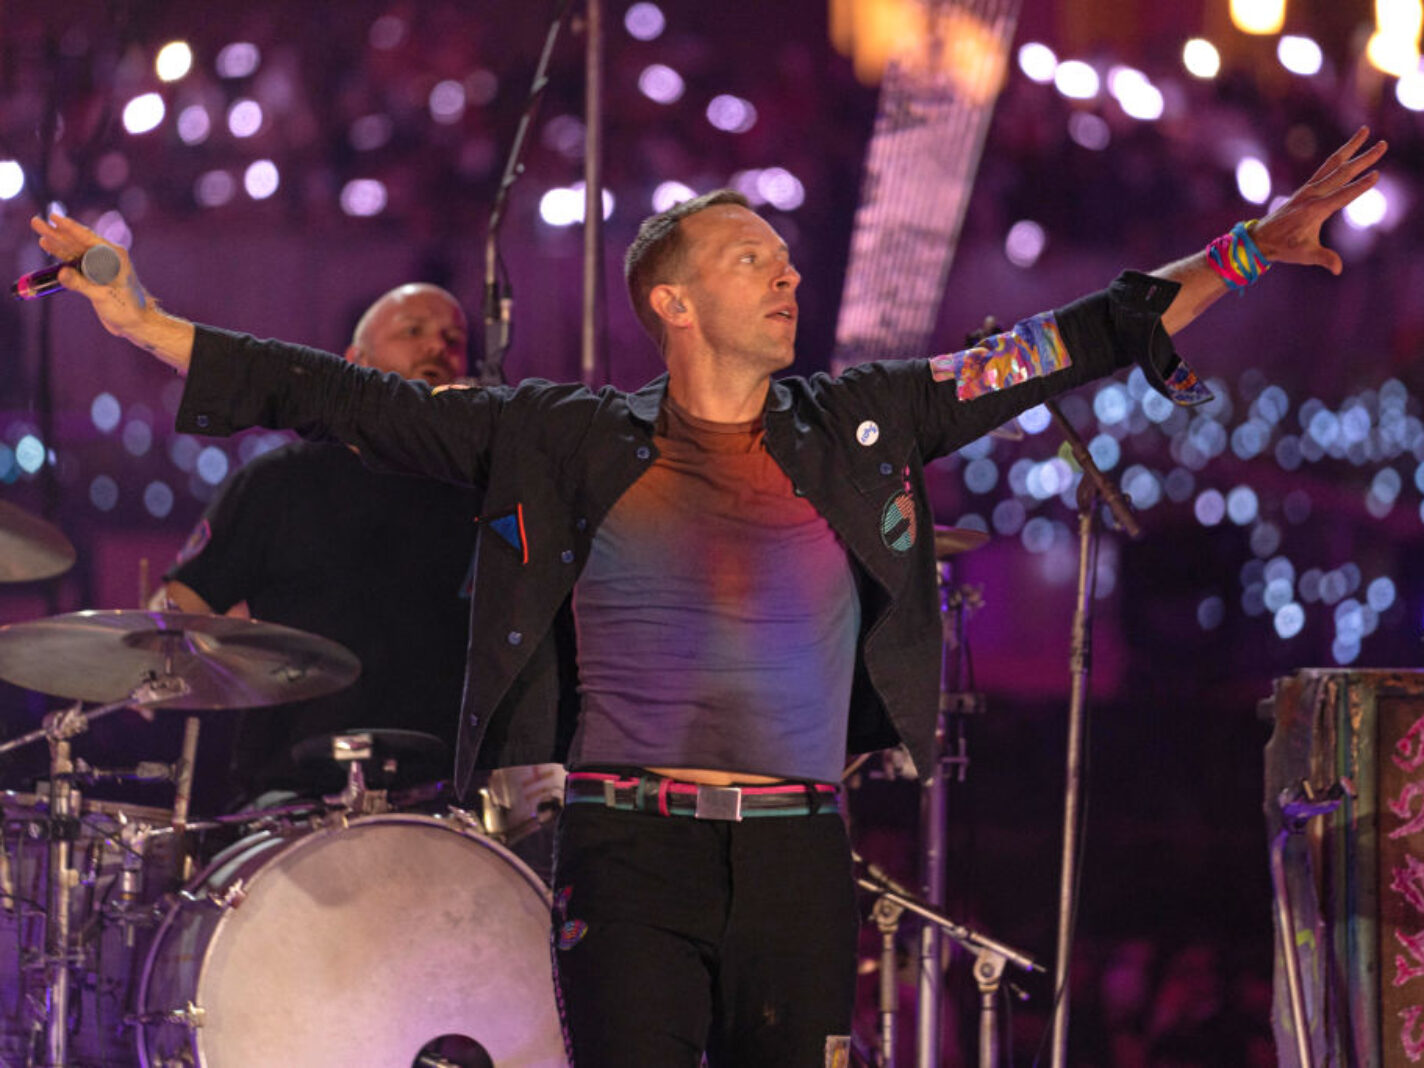 Autistic Fan Receives Special Gift from Coldplay After Memorable